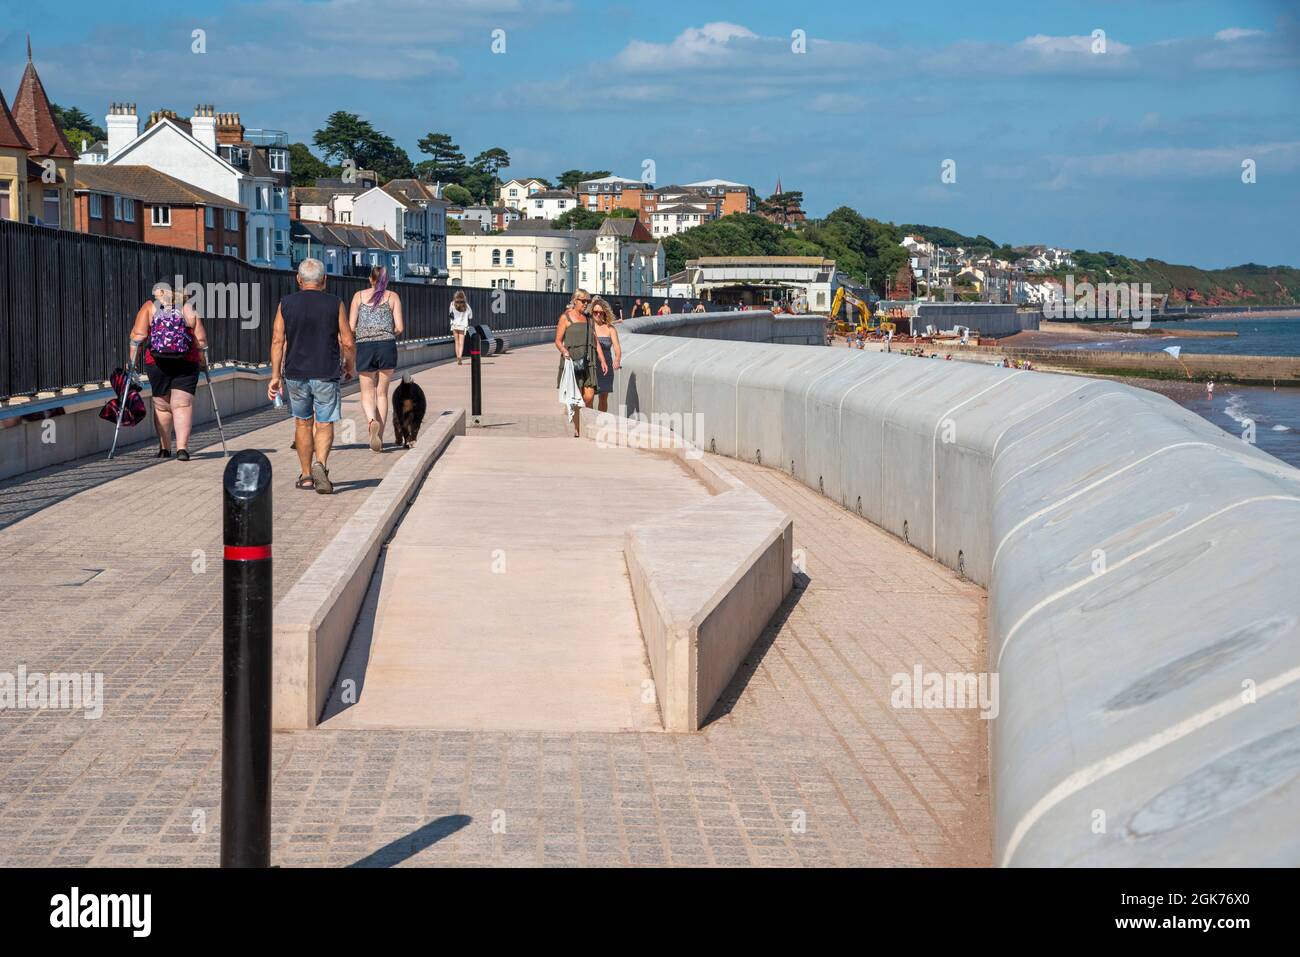 Dawlish, Devon, England, UK. 2021. A section of the new sea wall with a raised section of the walkway and railway line at Dawlish a coastal resort in Stock Photo